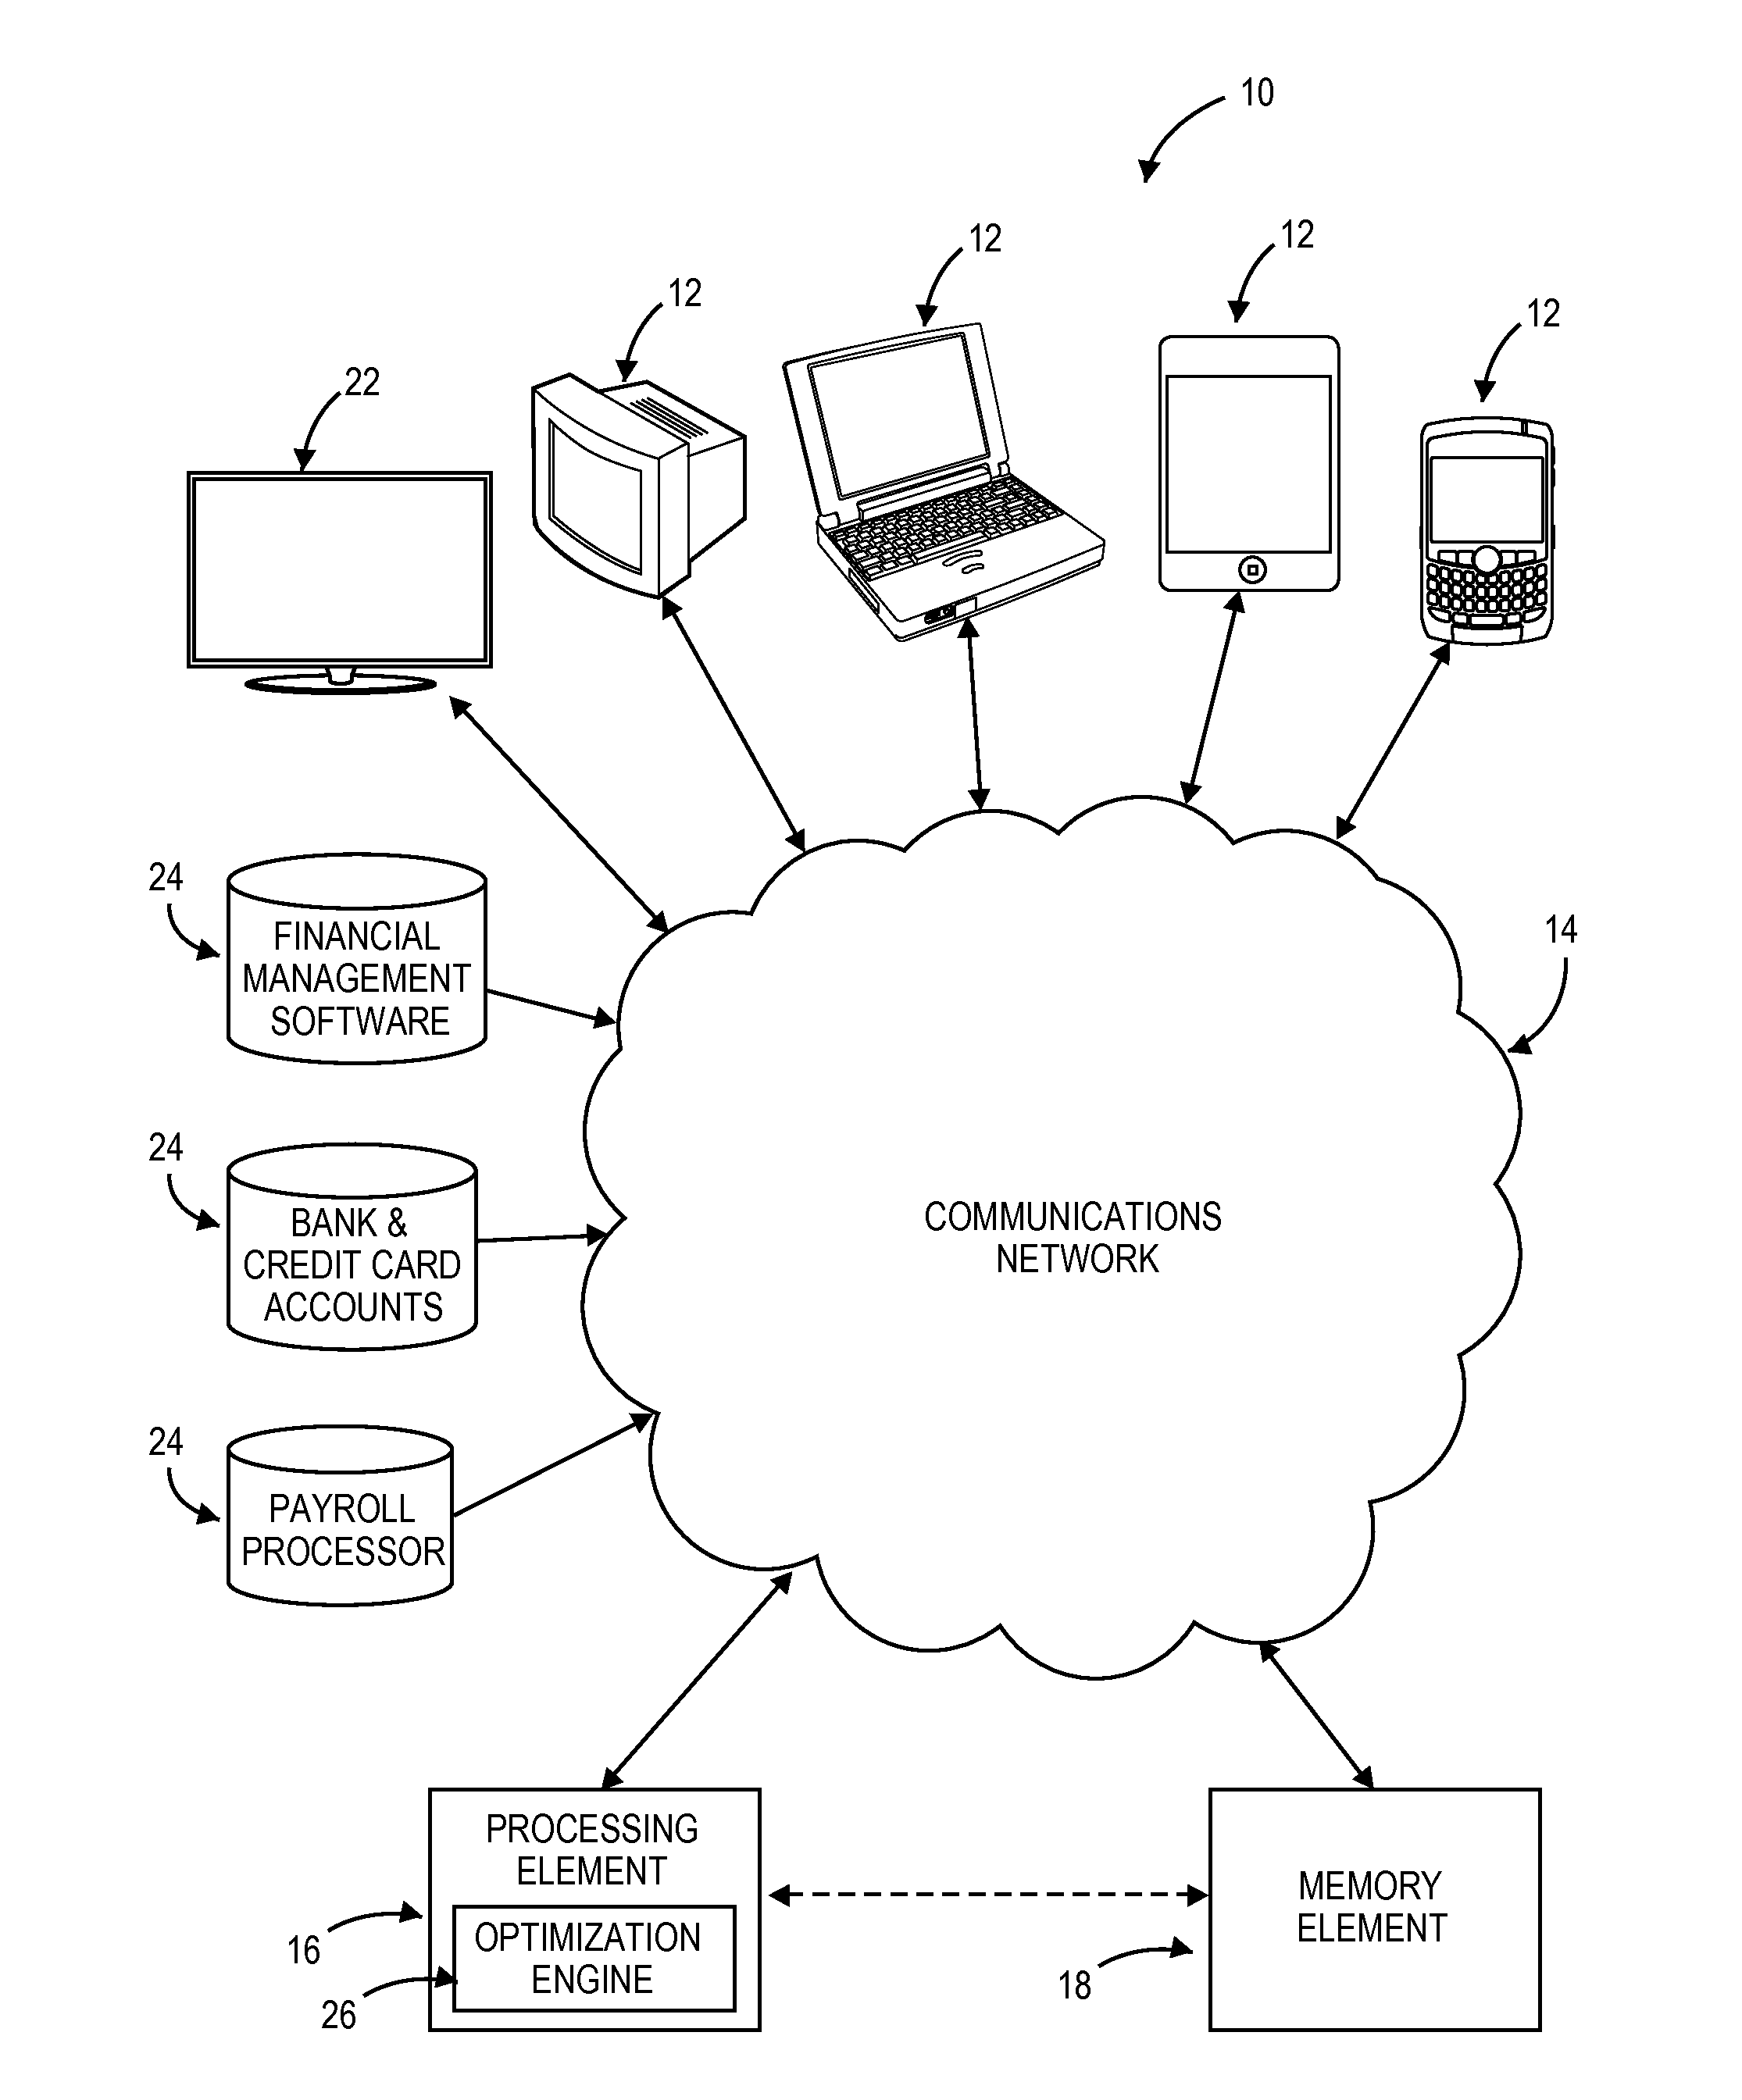 Computer program, method, and system for determining a taxpayer's income tax withholdings based on a specified goal of the taxpayer